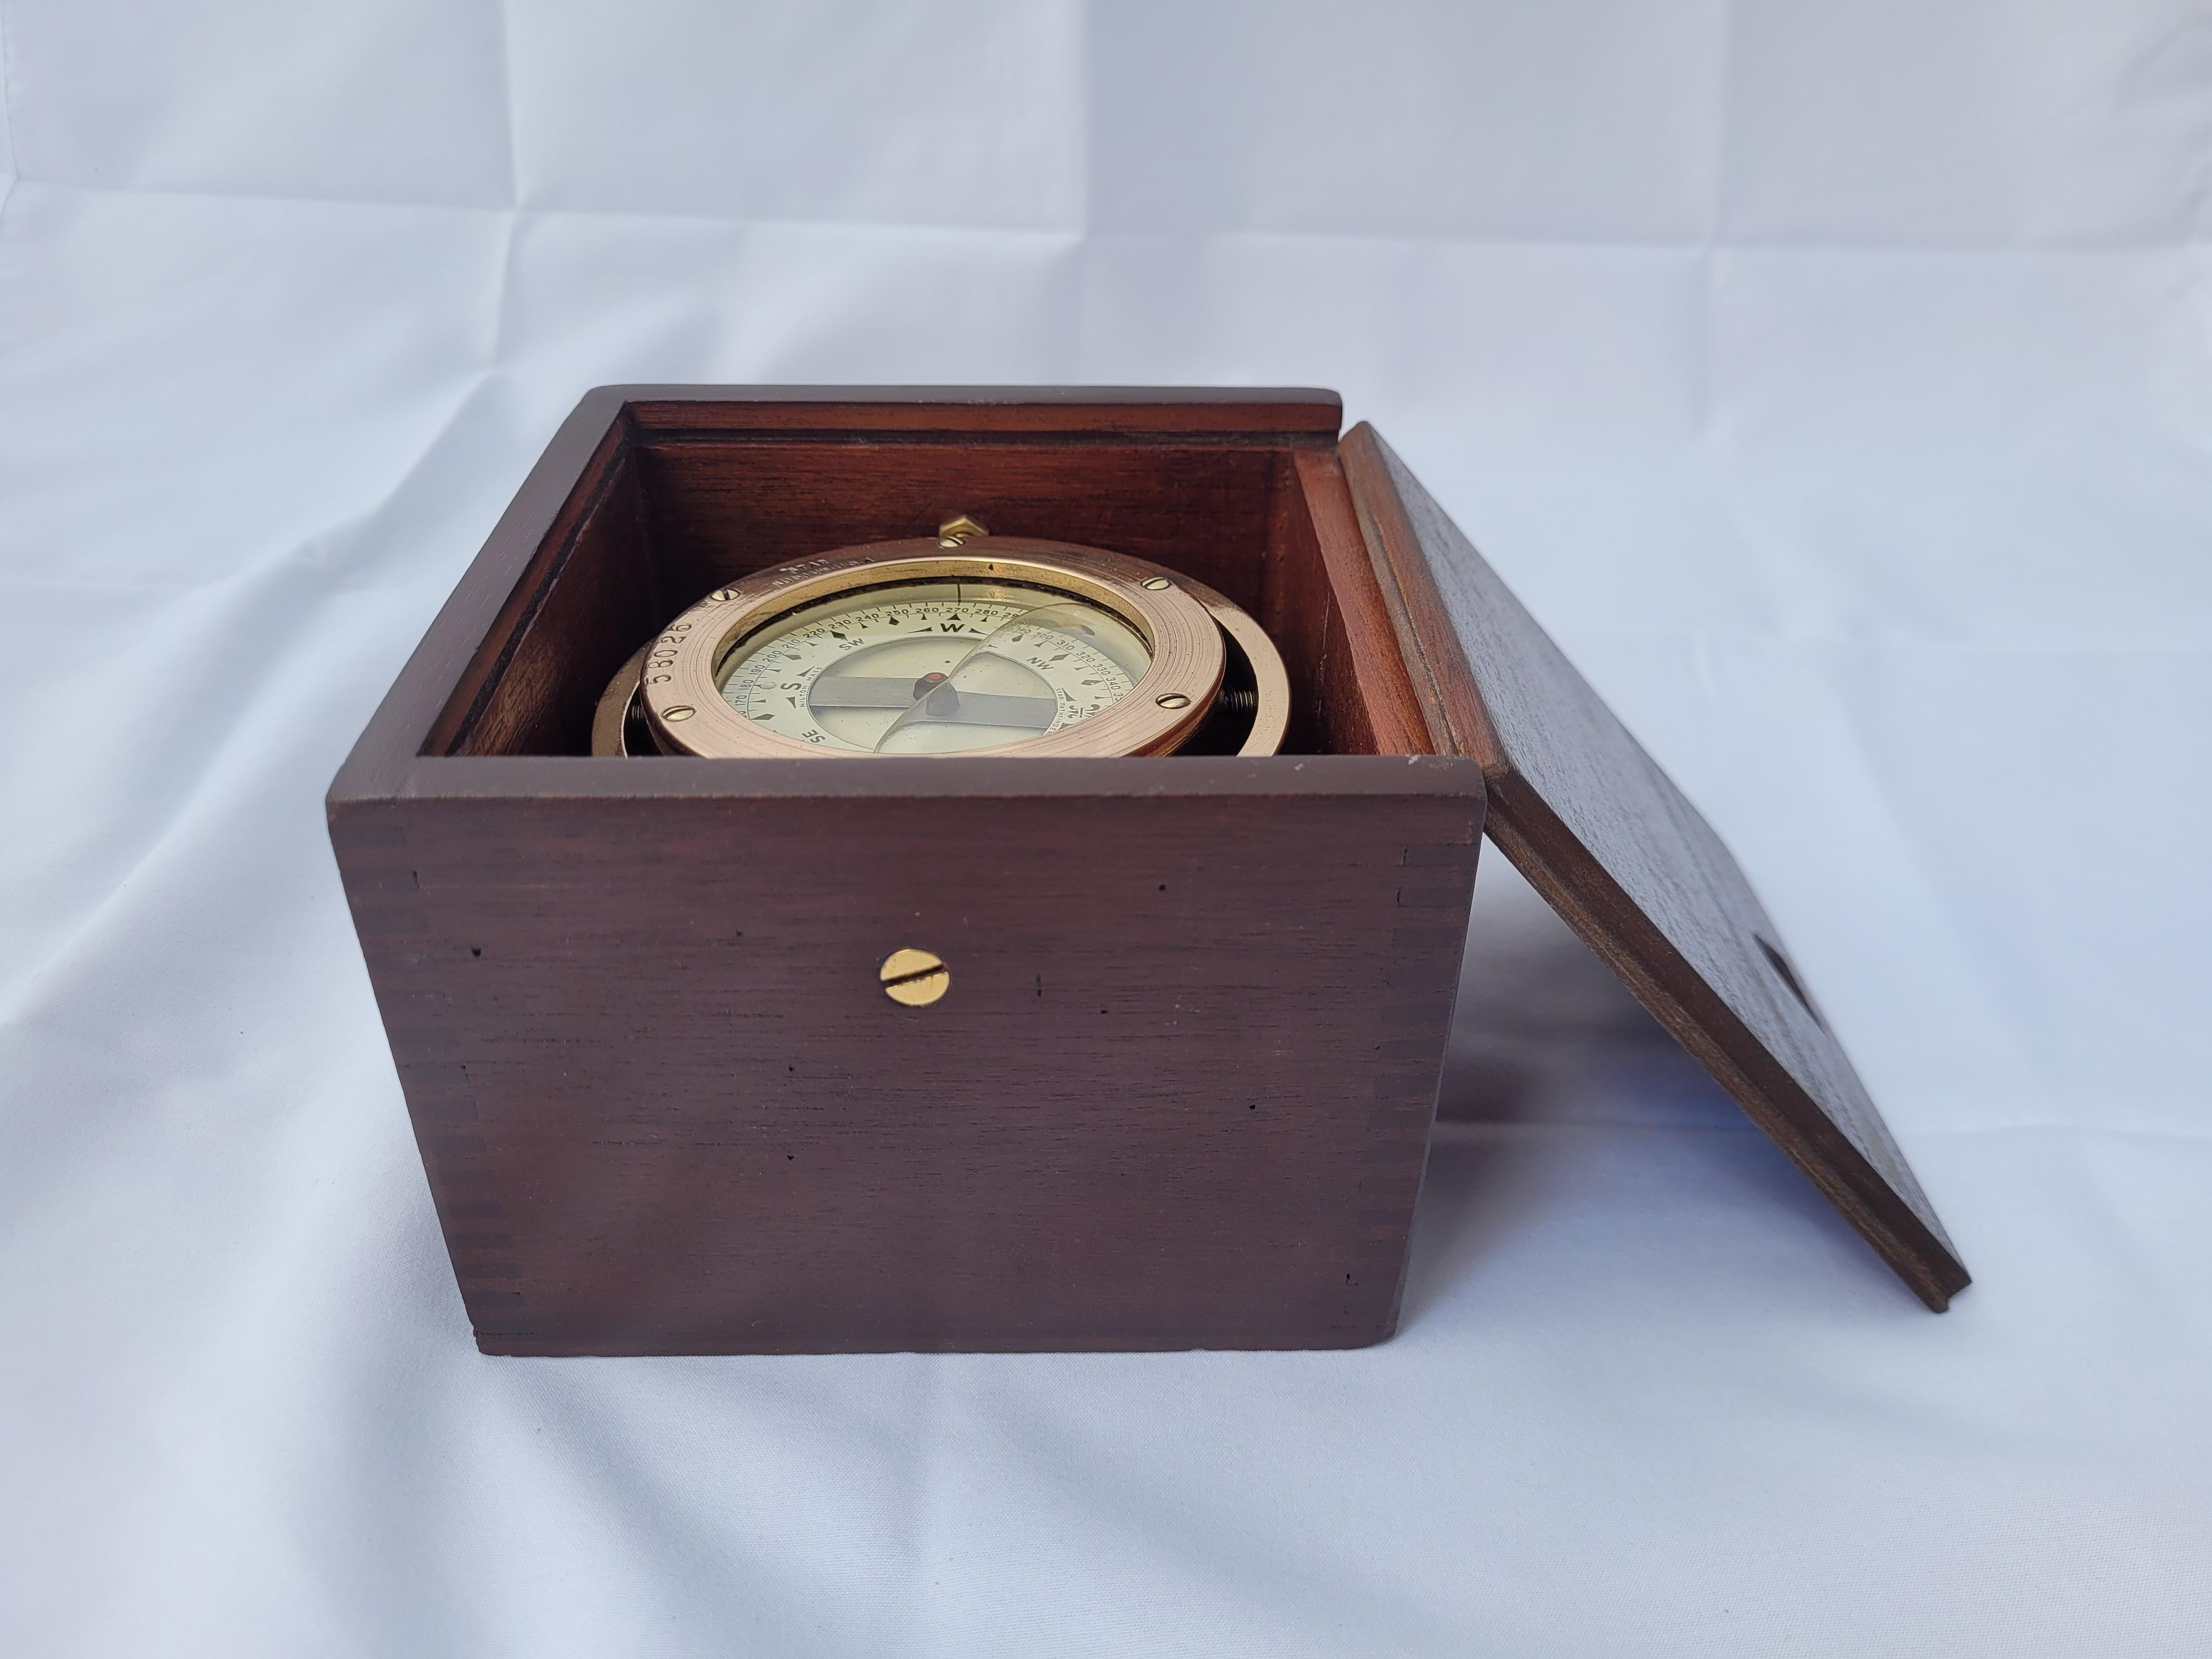 North American Marine Compass in Box by Star Compass of Boston For Sale